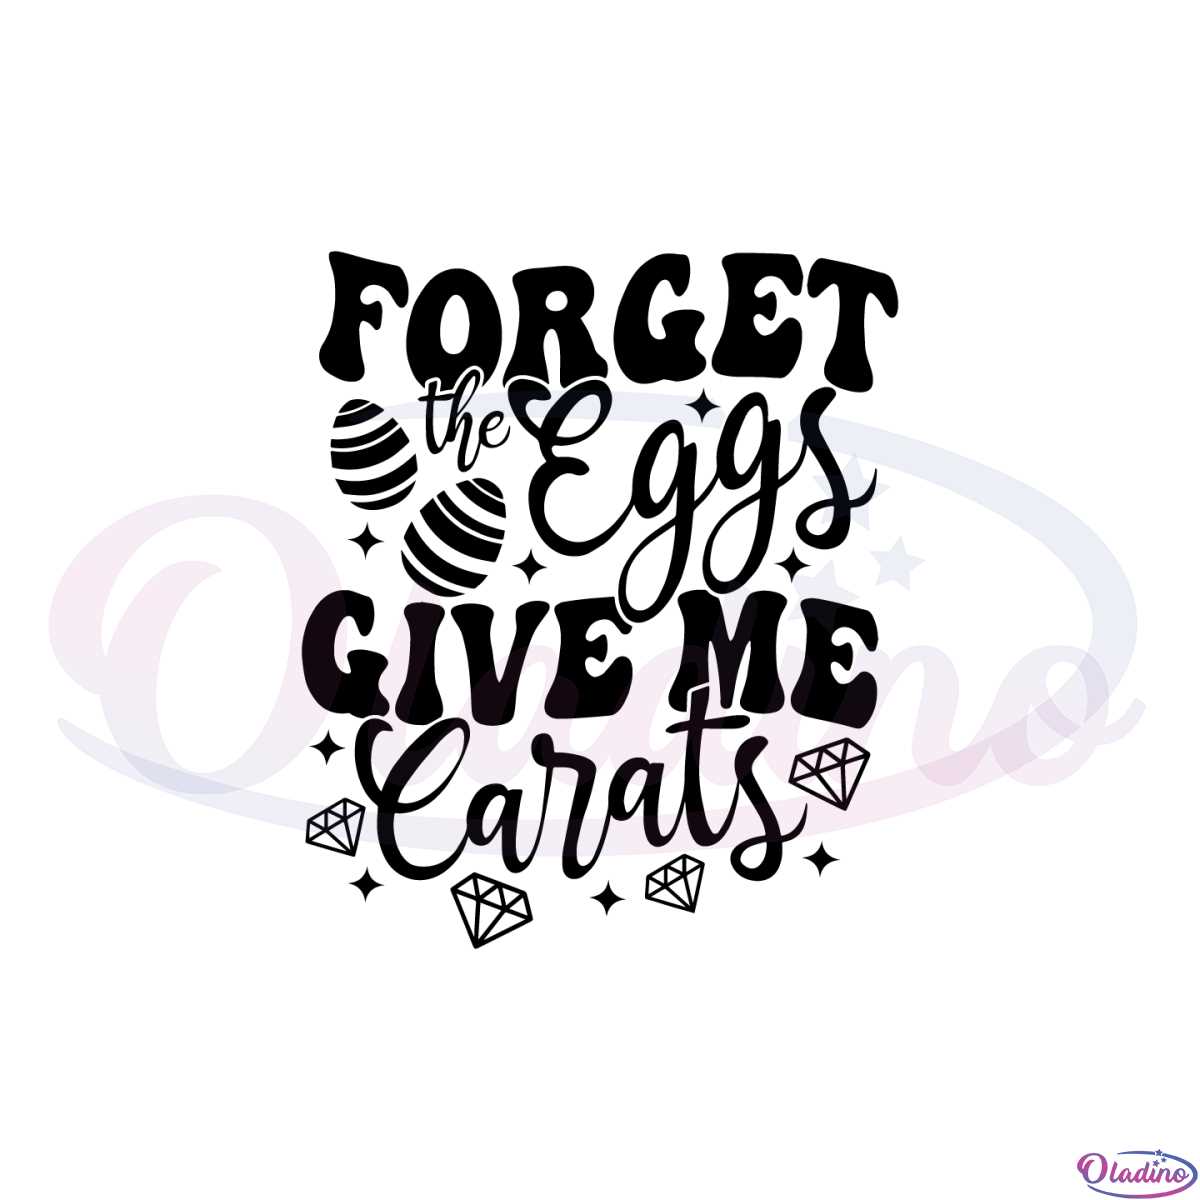 forget-the-eggs-give-me-carats-svg-graphic-designs-files